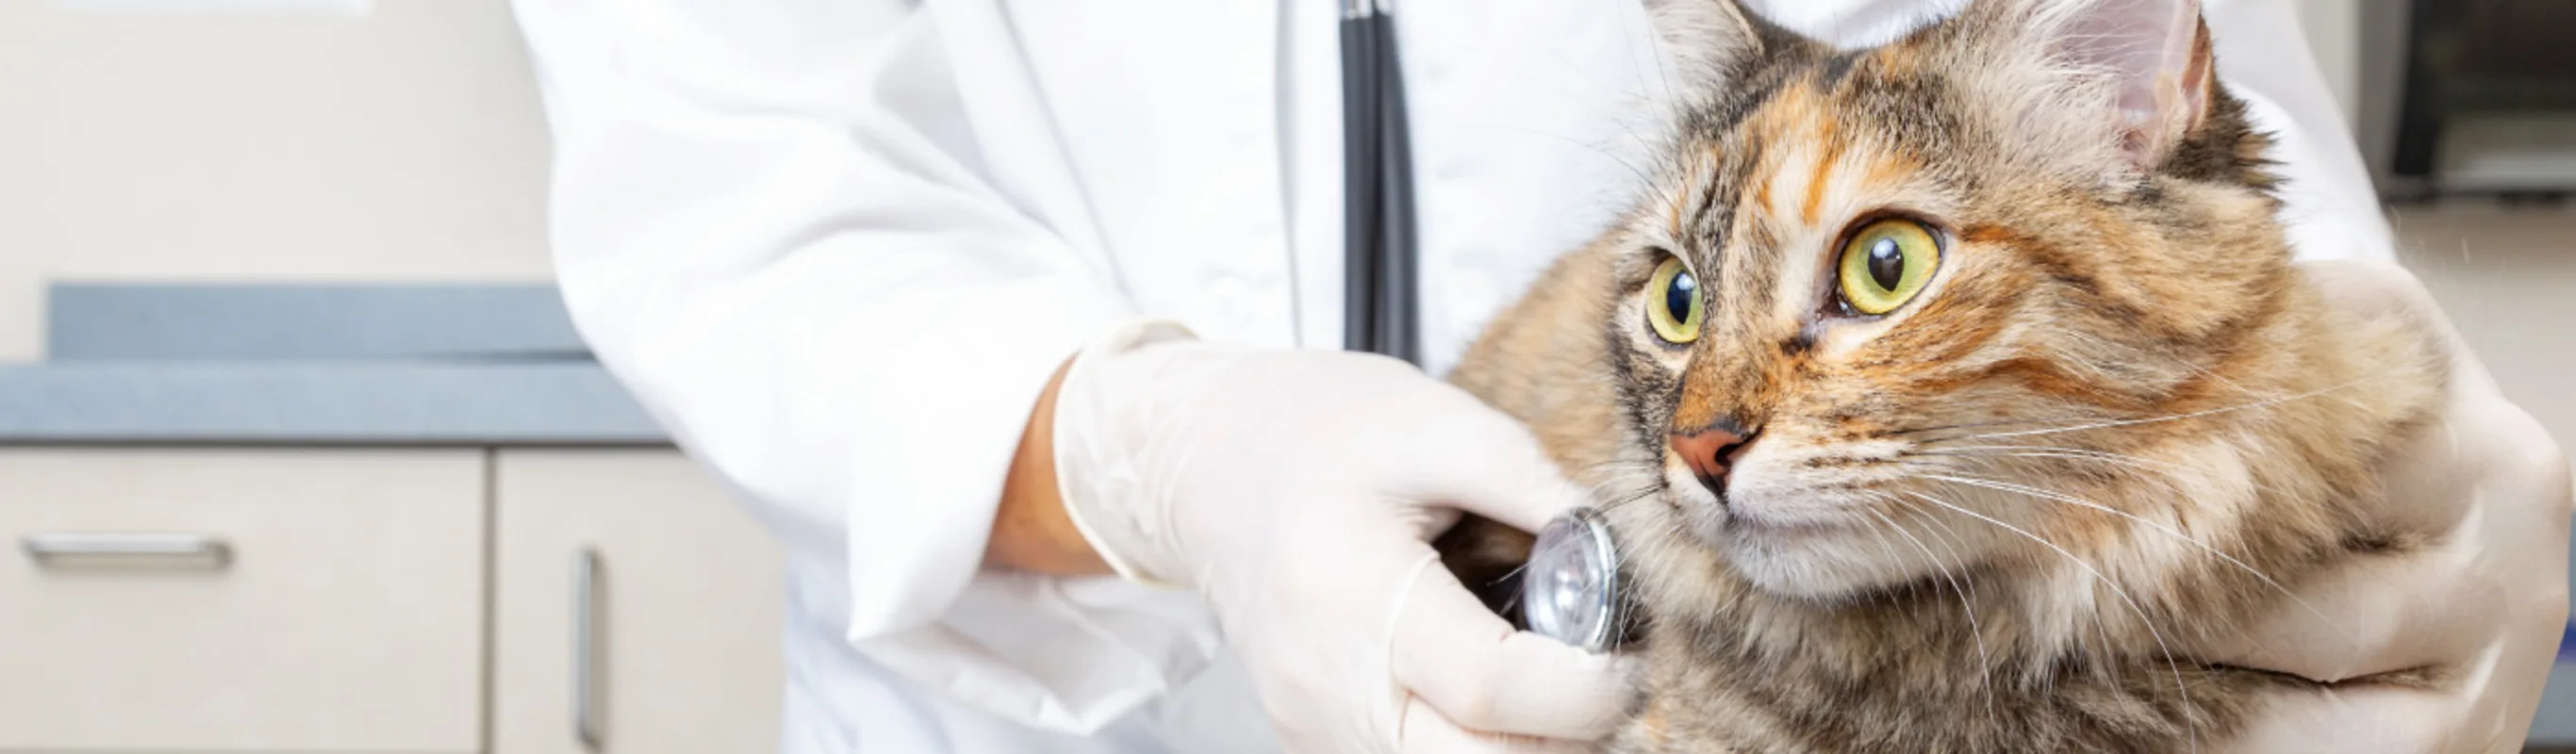 Cat being examined by a veterinarian with a stethoscope